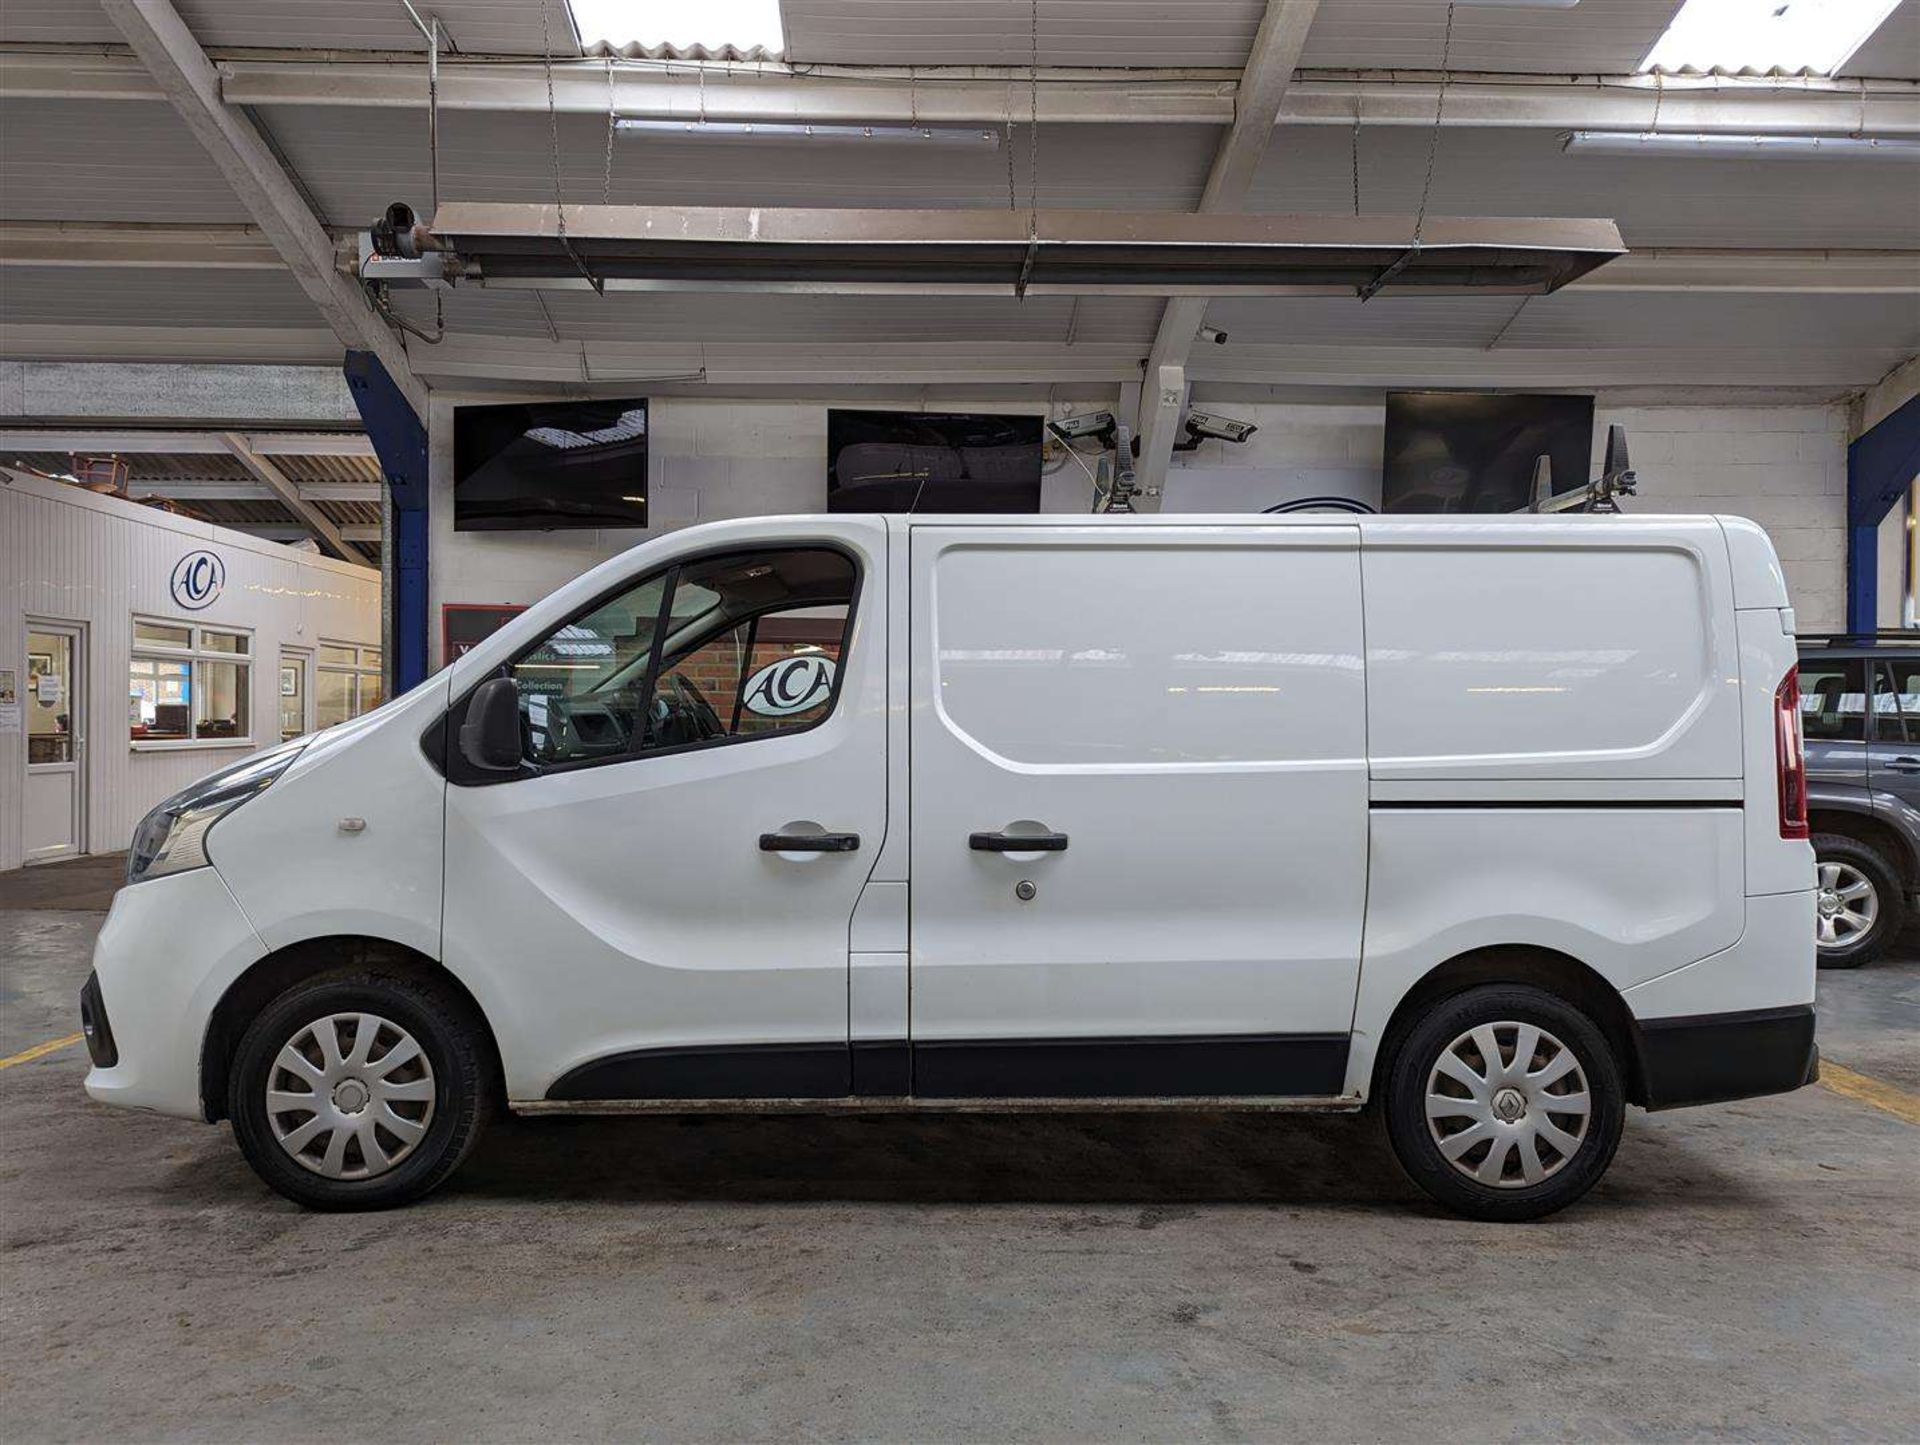 2015 RENAULT TRAFIC SL27 BUSINESS + DC - Image 2 of 30